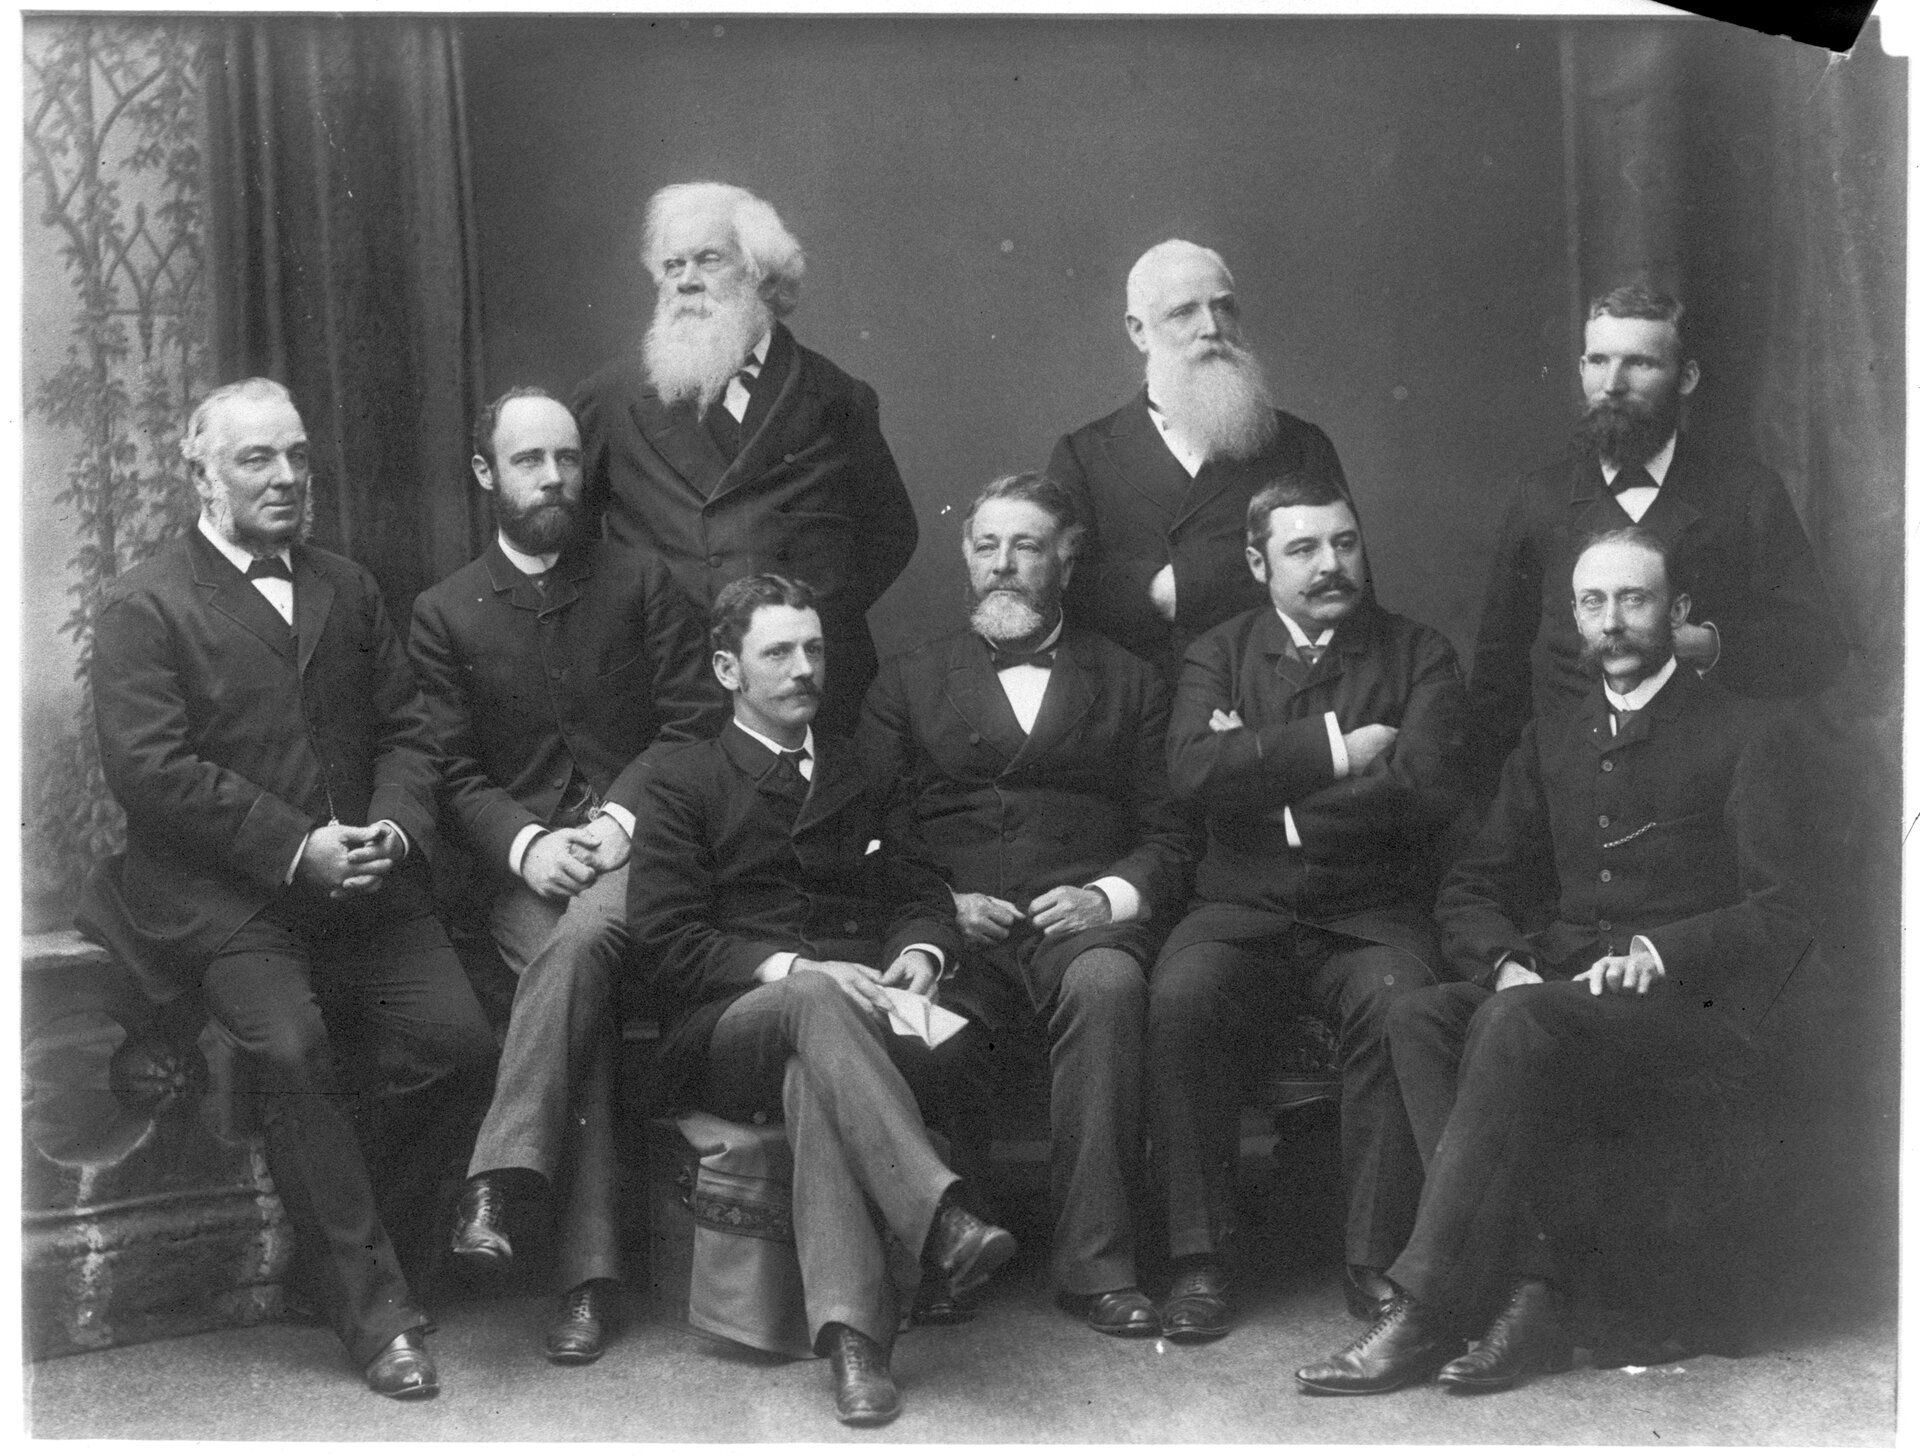 A group photo of men in formal attire 